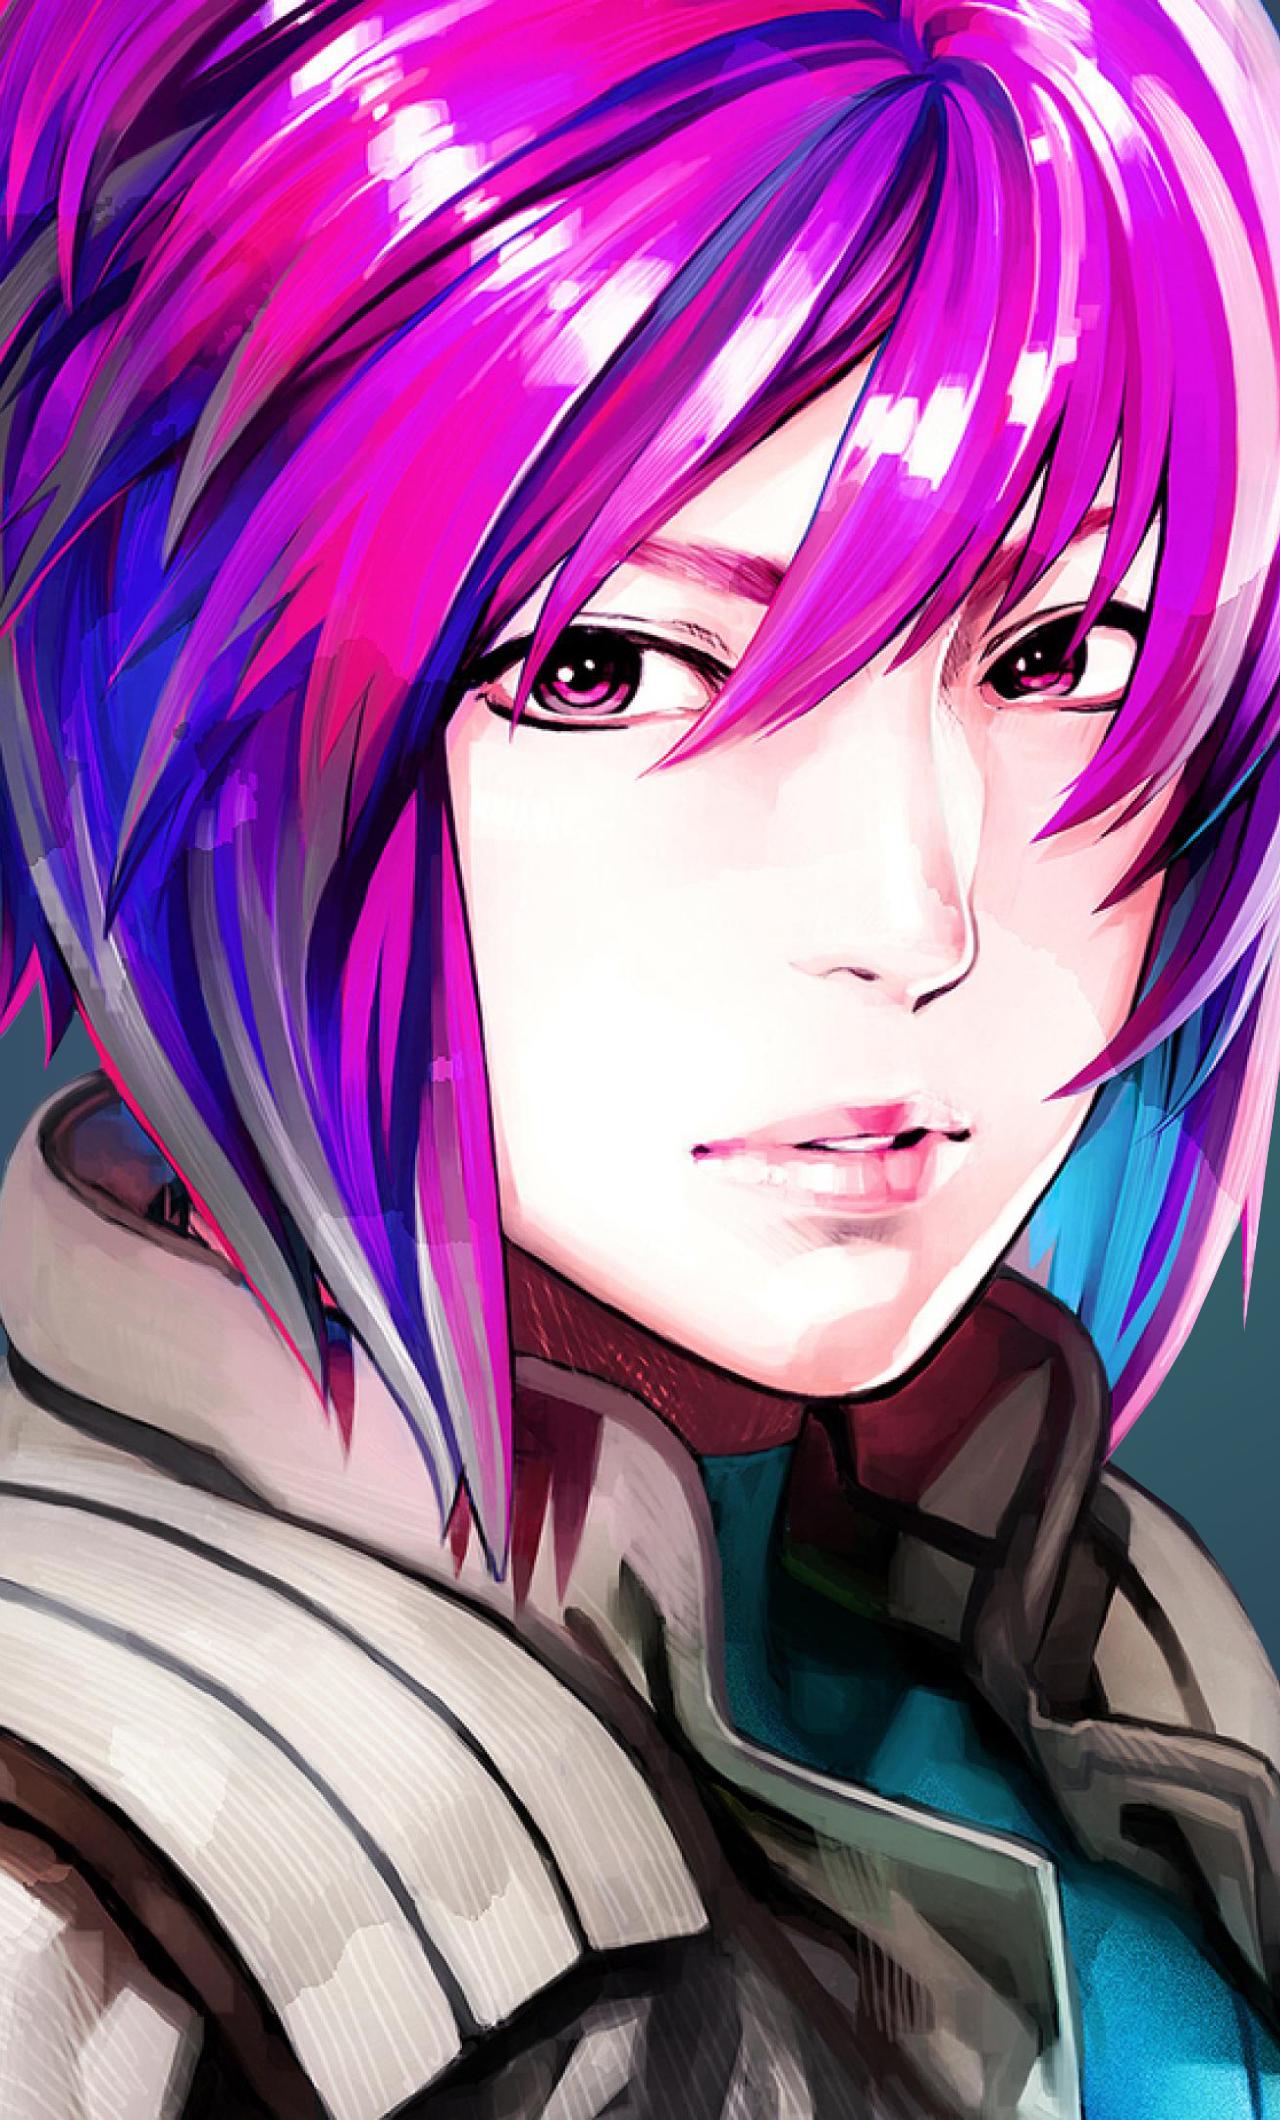 Ghost In The Shell Iphone Wallpaper Anime Girl With Pink And